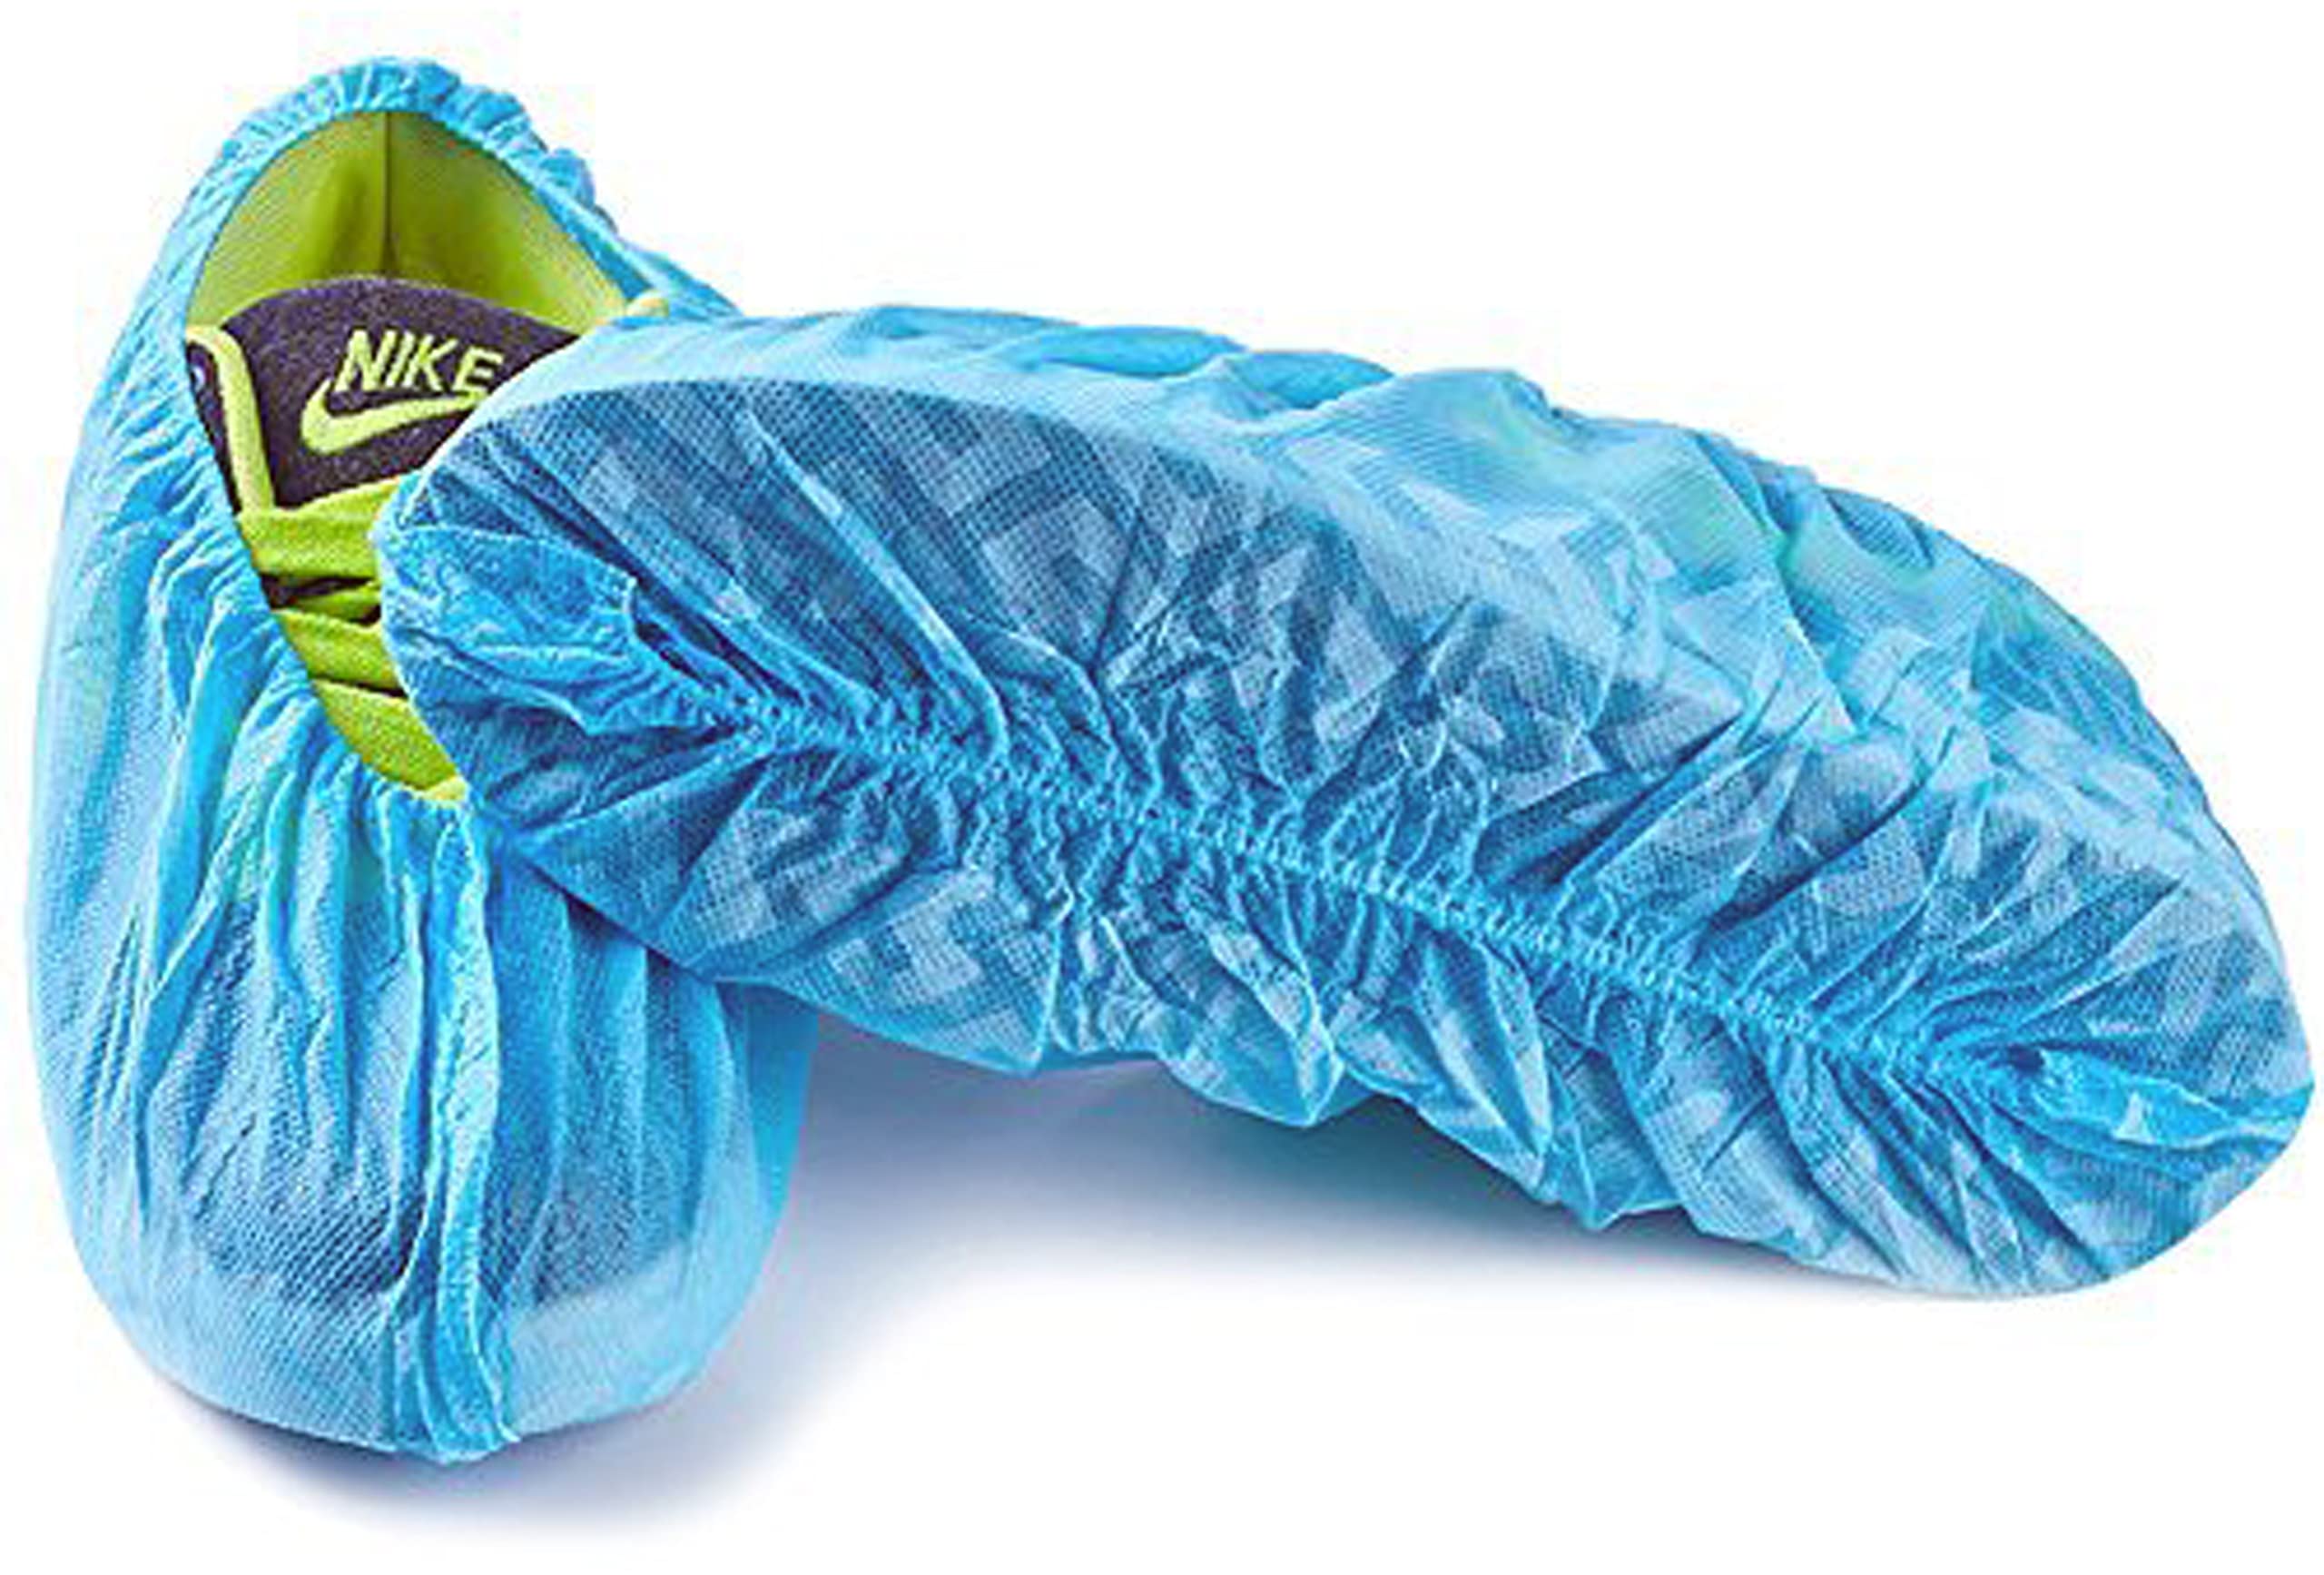 G & F Products - 13033 Premium 100 Pack (50 Pairs ) Disposable Boot & Shoe Covers Slip - Resistant fits up to size 11 US Men and 13 US Women, Blue, Large